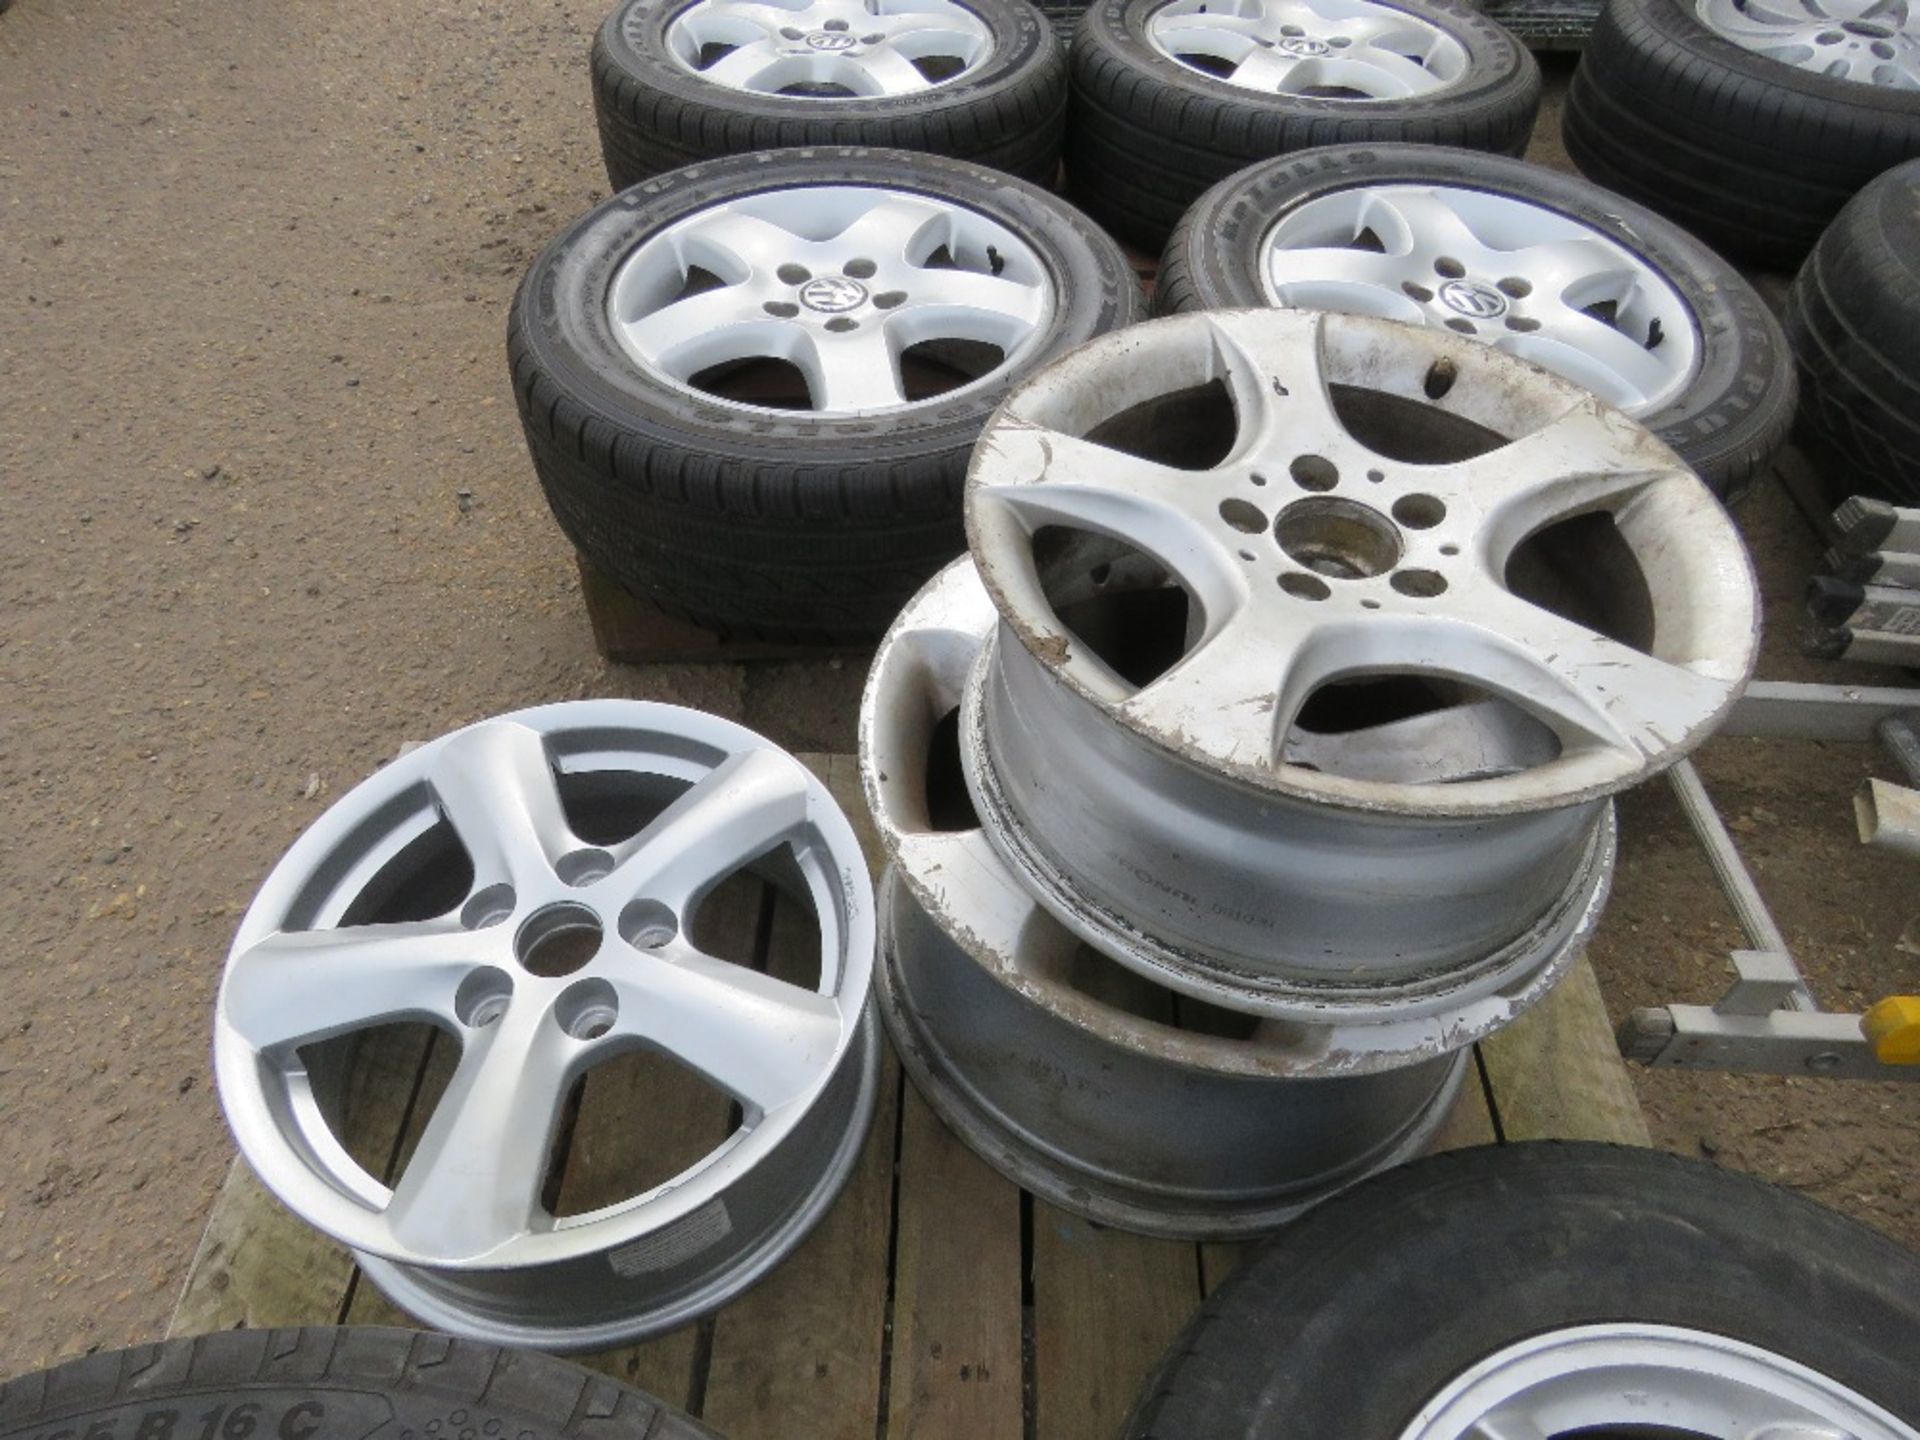 3NO VW ALLOY WHEELS AND TYRES PLUS 3NO RIMS. - Image 4 of 6